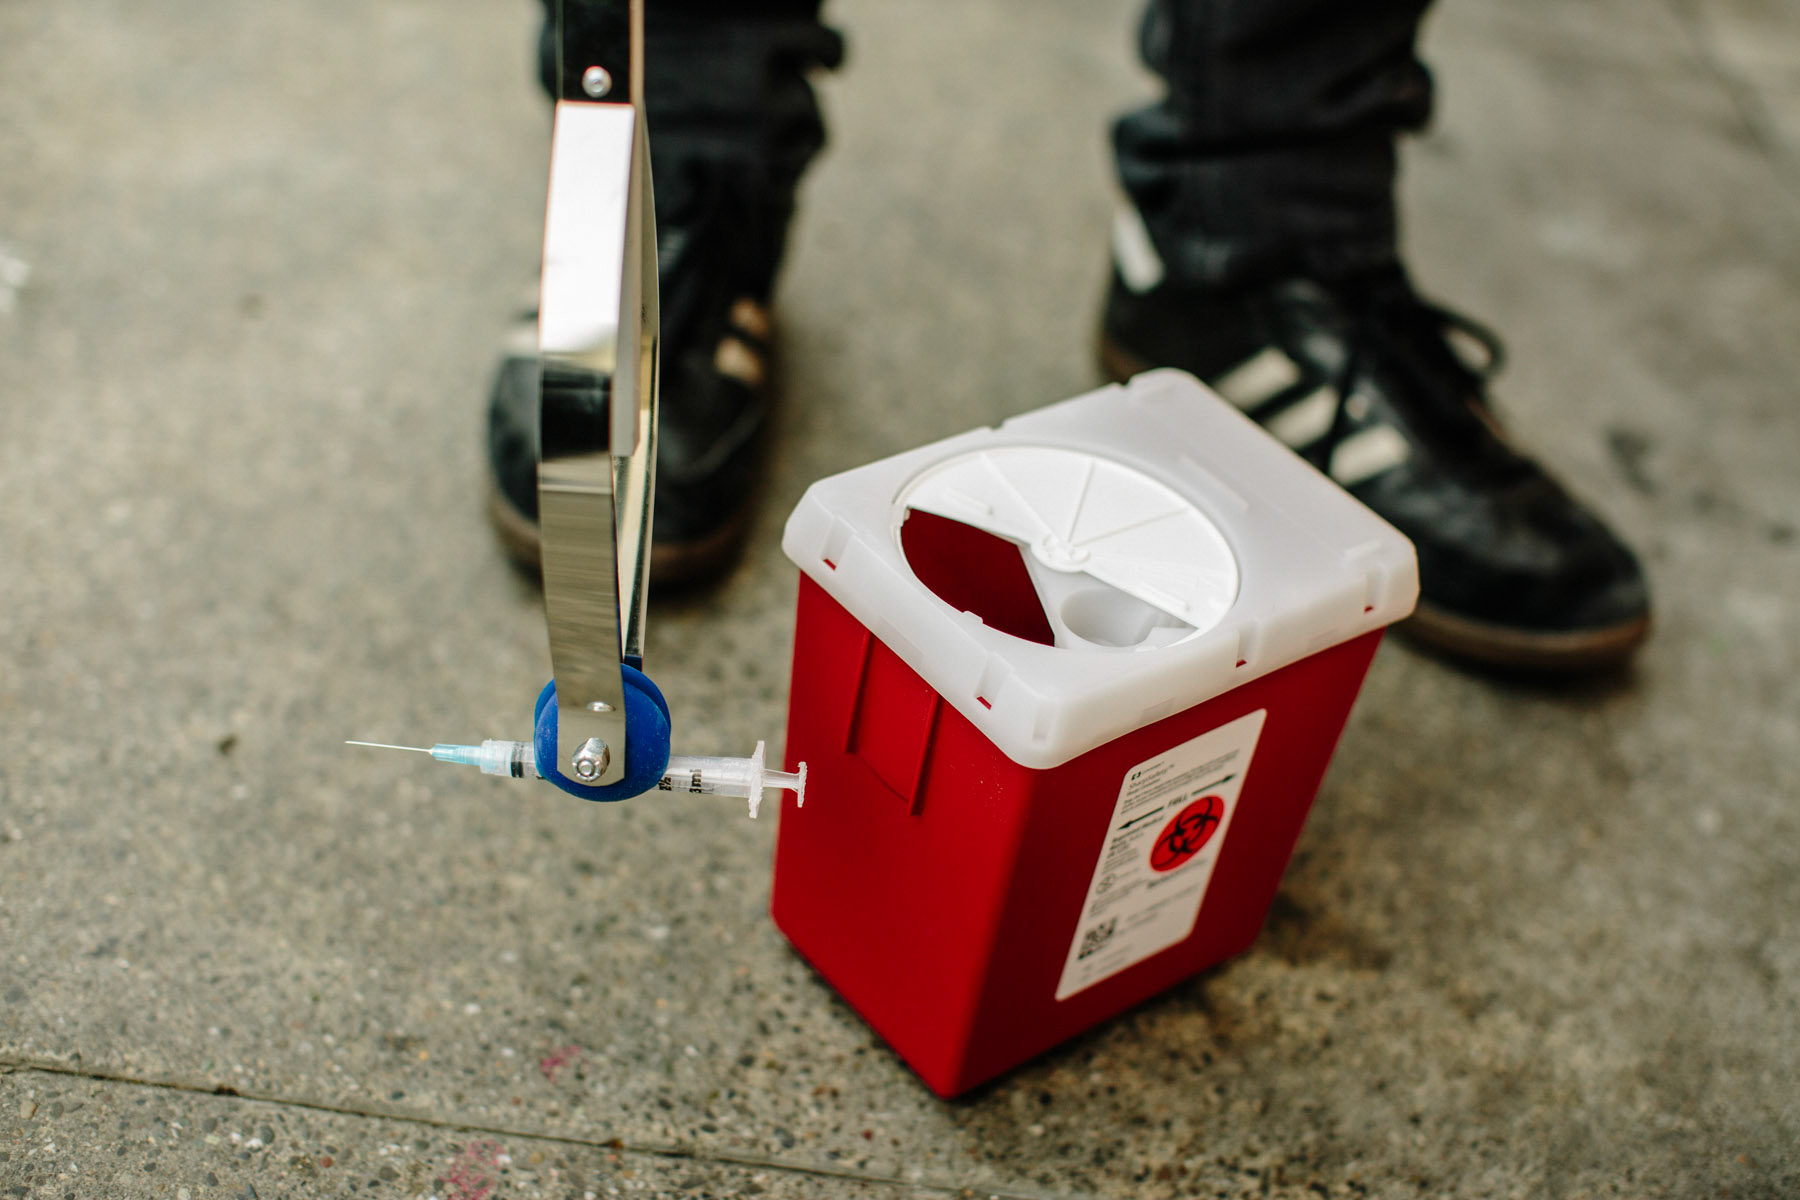 Getting syringes off San Francisco streets